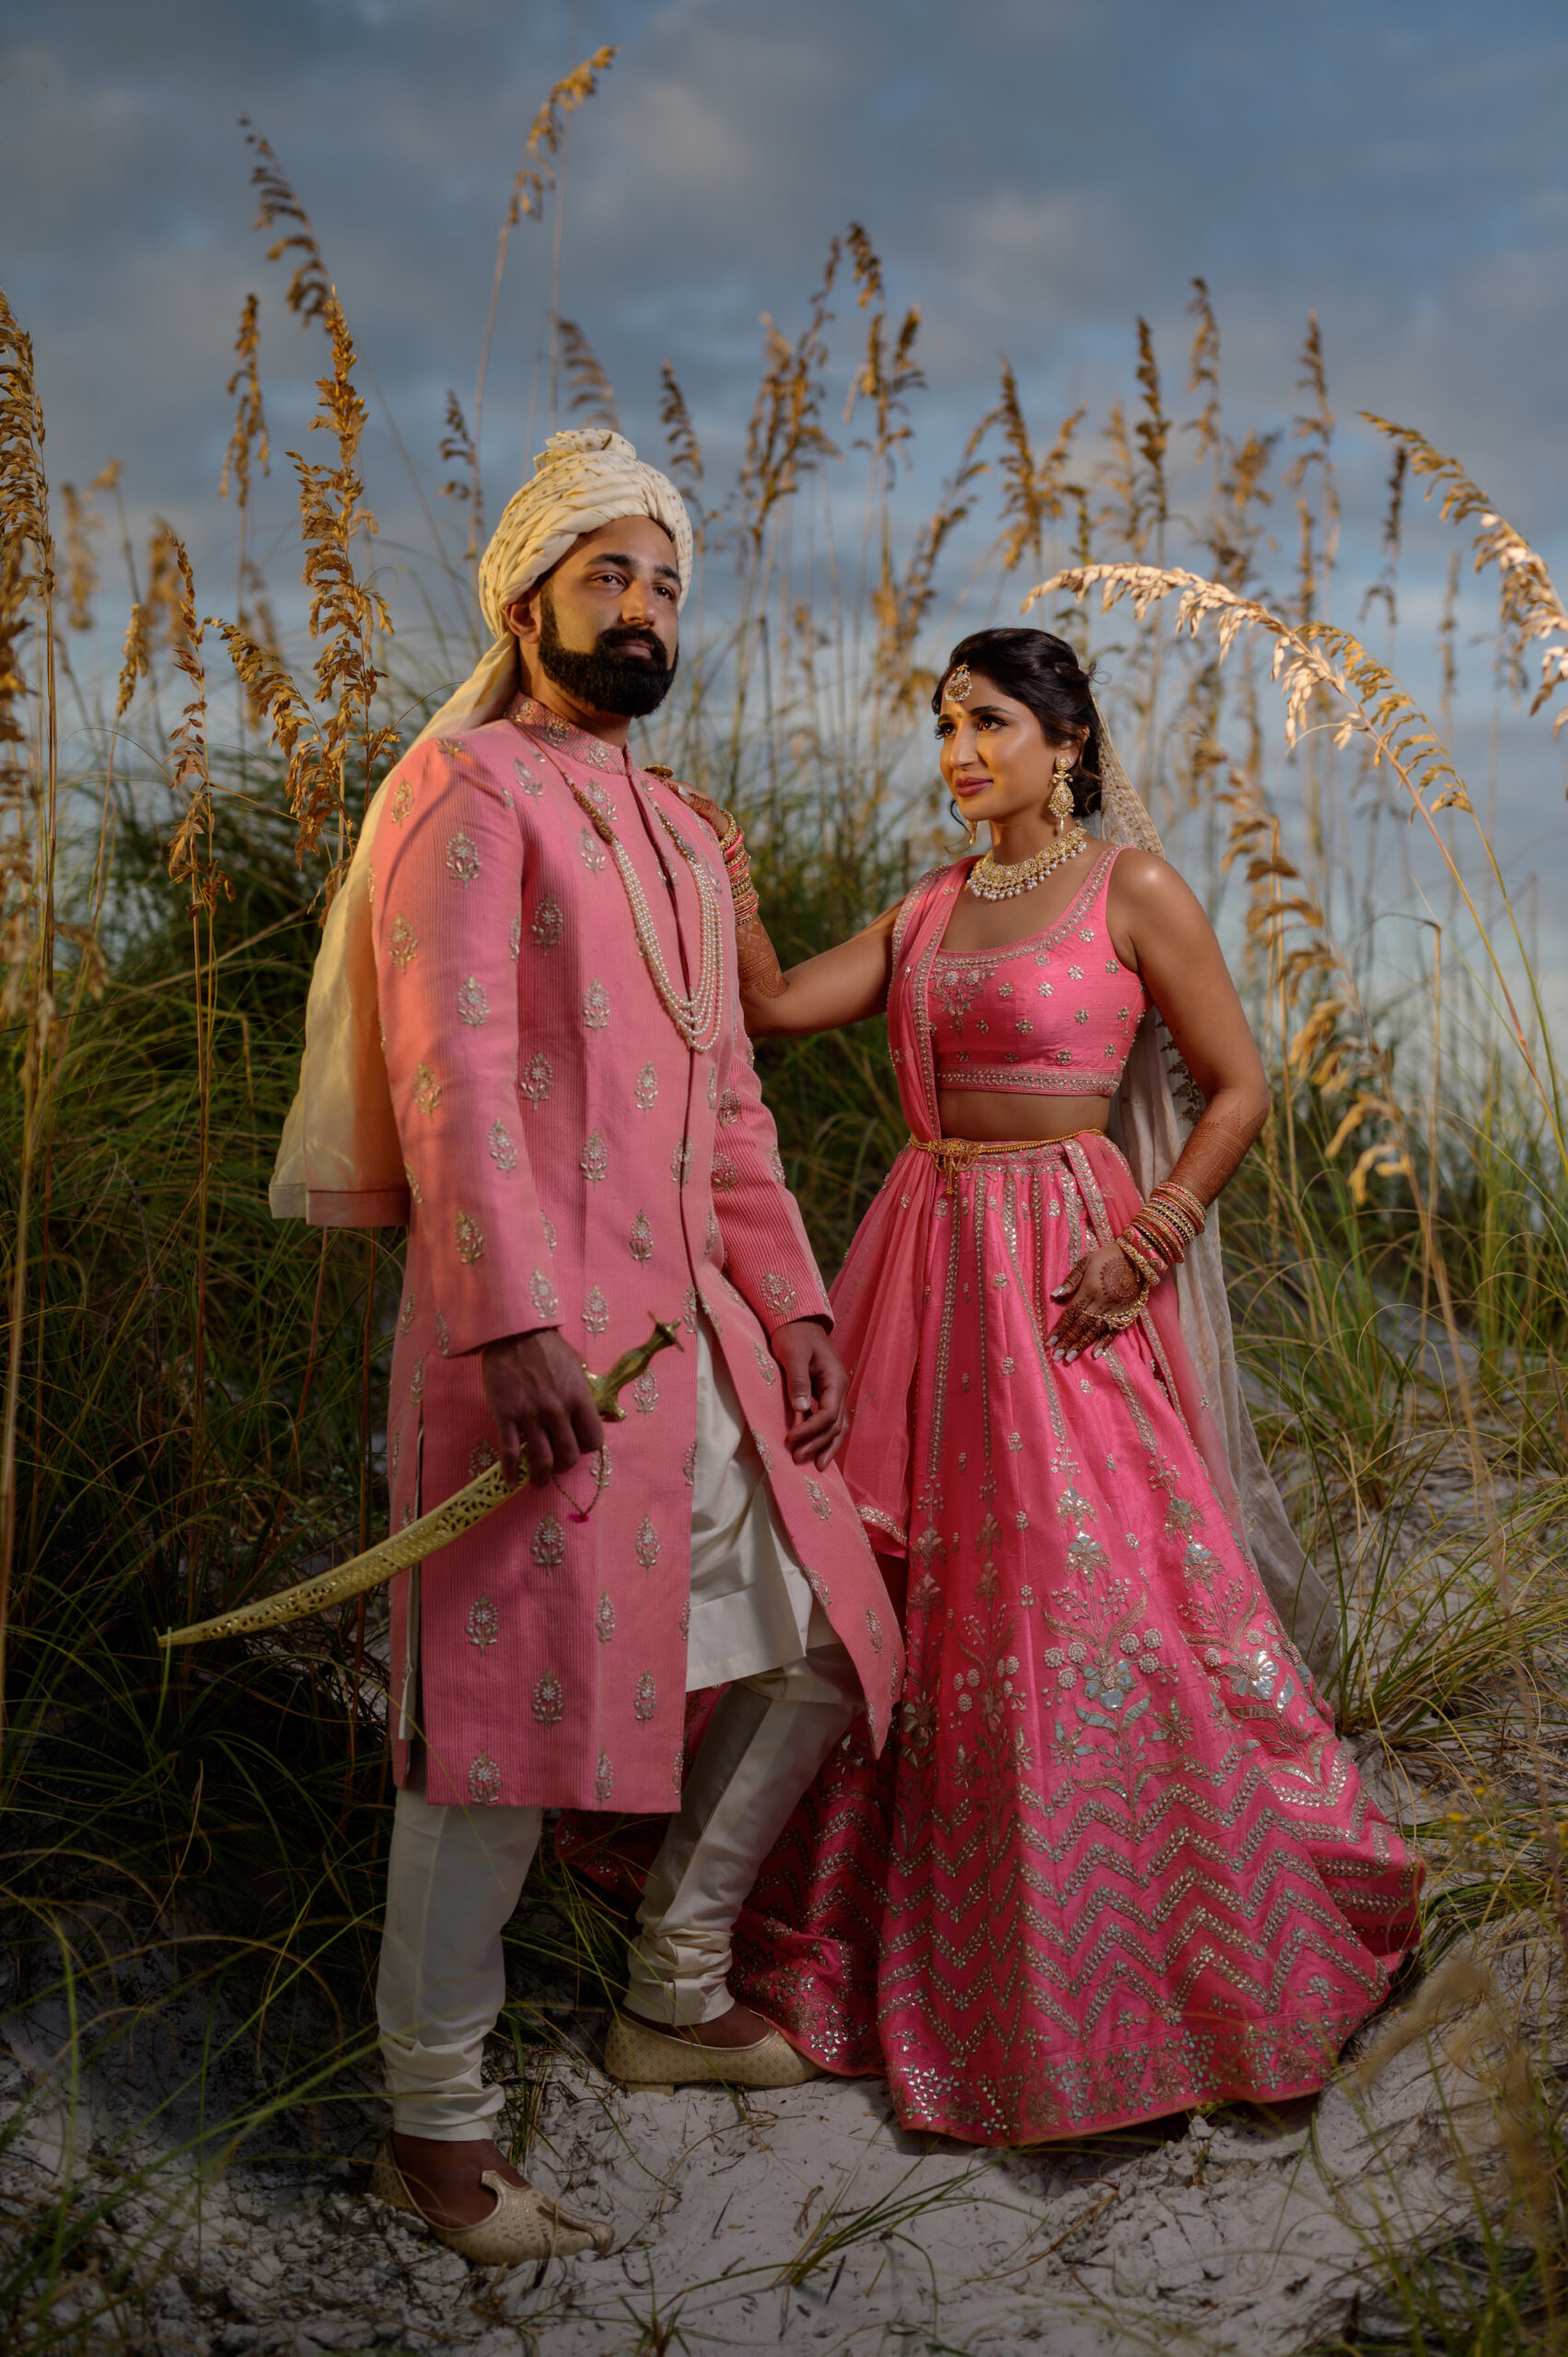 Florida Bride and Groom At Beach, Wearing Traditional Indian Wedding Attire in Bright Pink and Gold | Tampa Bay Hair and Makeup Artist Michele Renee The Studio | Venue Hilton Clearwater Beach Resort